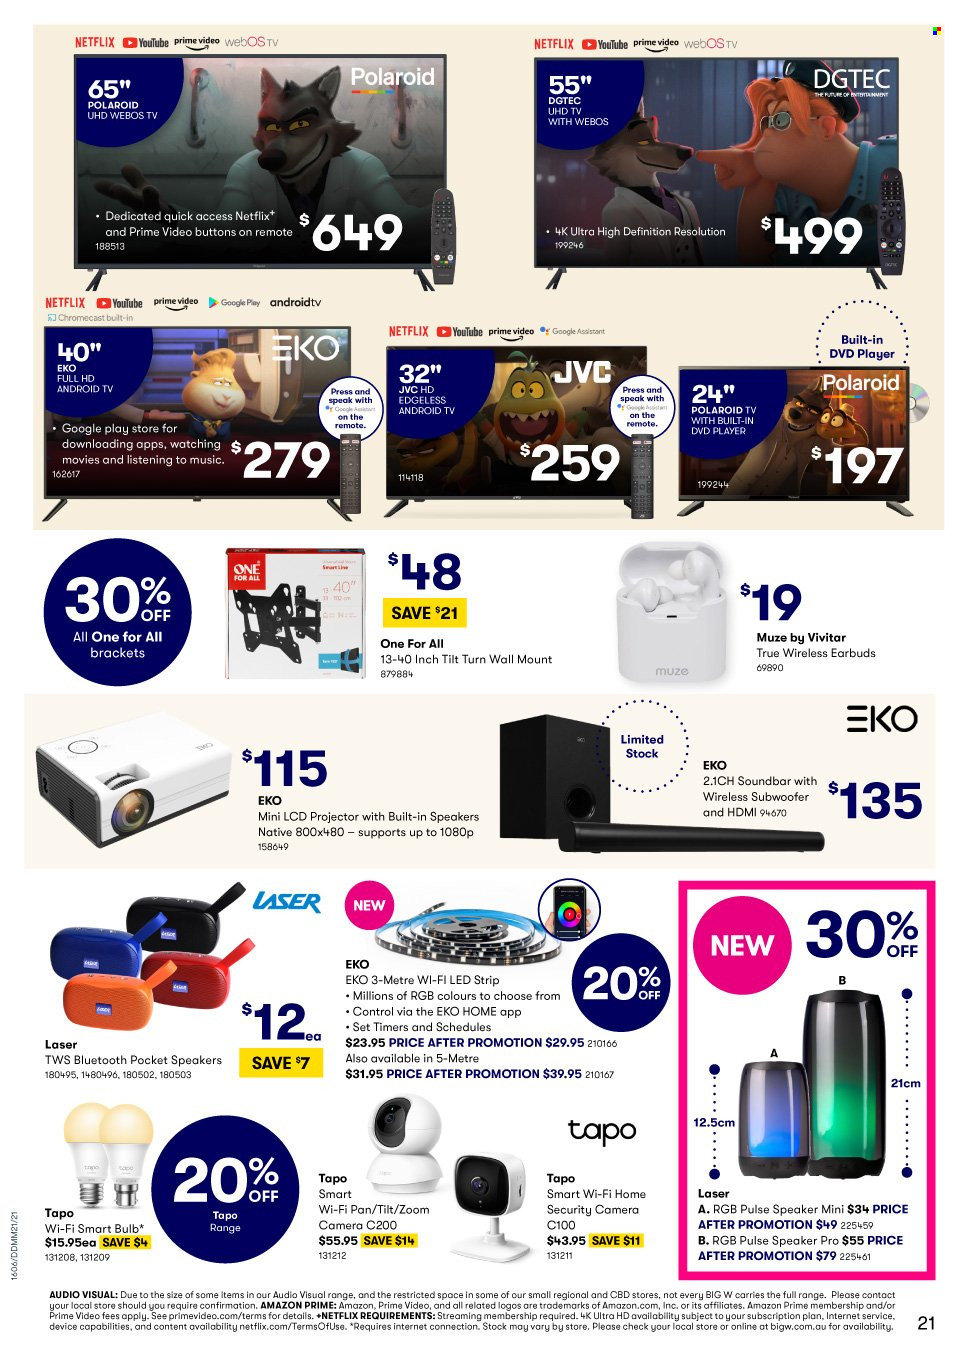 thumbnail - BIG W Catalogue - Sales products - pan, bulb, Vivitar, security camera, Polaroid, Zoom Camera, camera, JVC, Android TV, UHD TV, ultra hd, TV, dvd player, projector, speaker, subwoofer, wireless subwoofer, sound bar, earbuds, Google Chromecast, LED strip. Page 21.